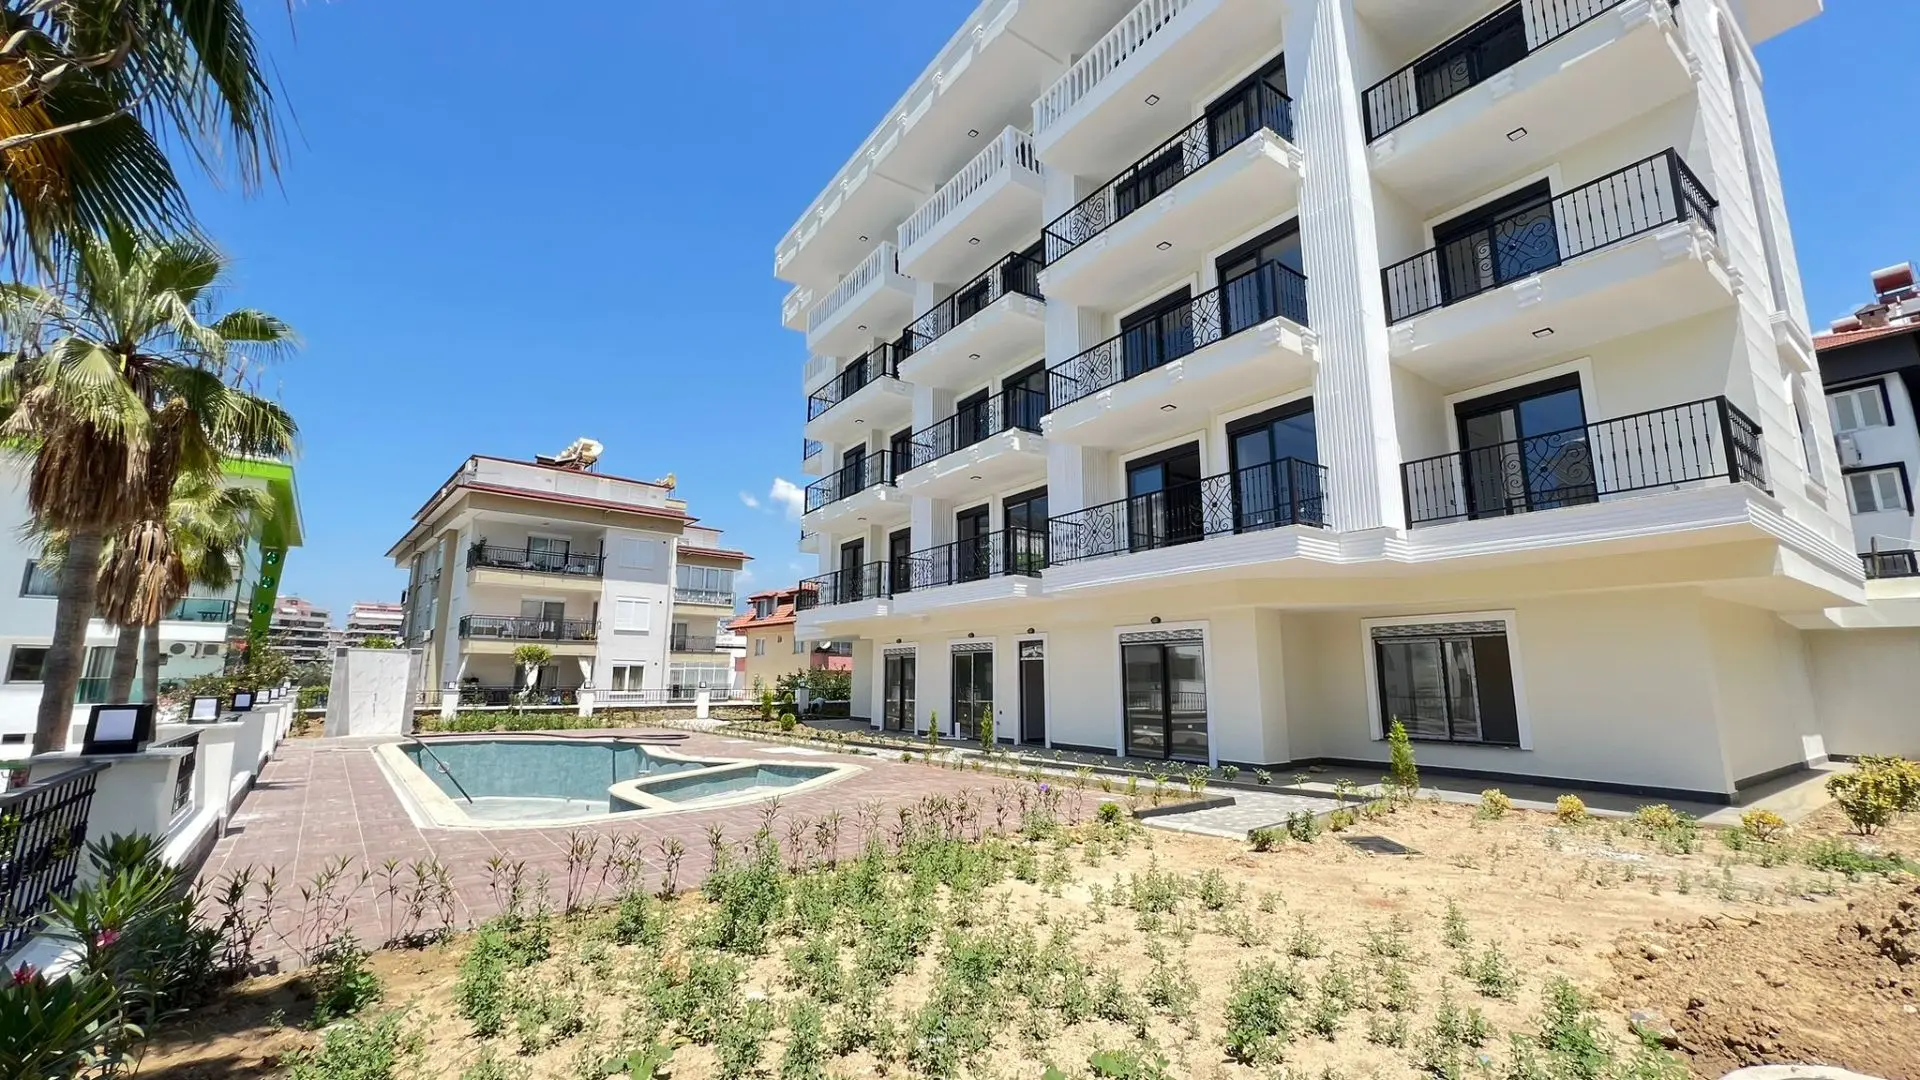 NEWLLY BUİLT APARTMENT FOR SALE İN THE BEST LOCATİON OF KESTEL